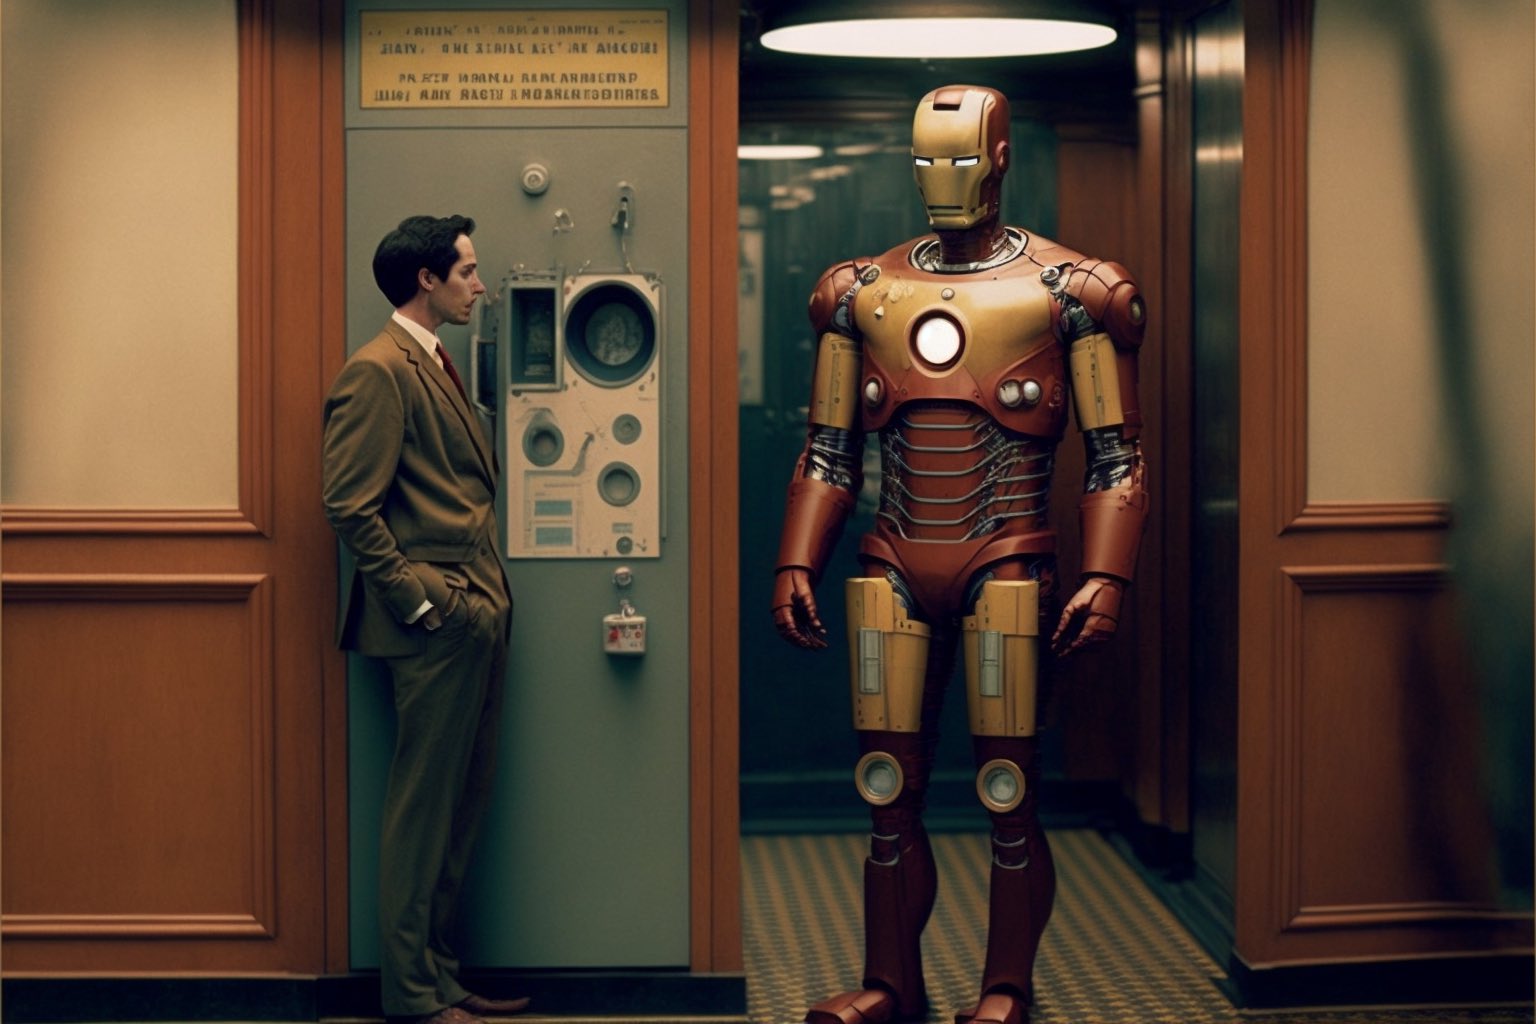 The Avengers 1980 directed by Wes Anderson - Midjourney V4 image generator version